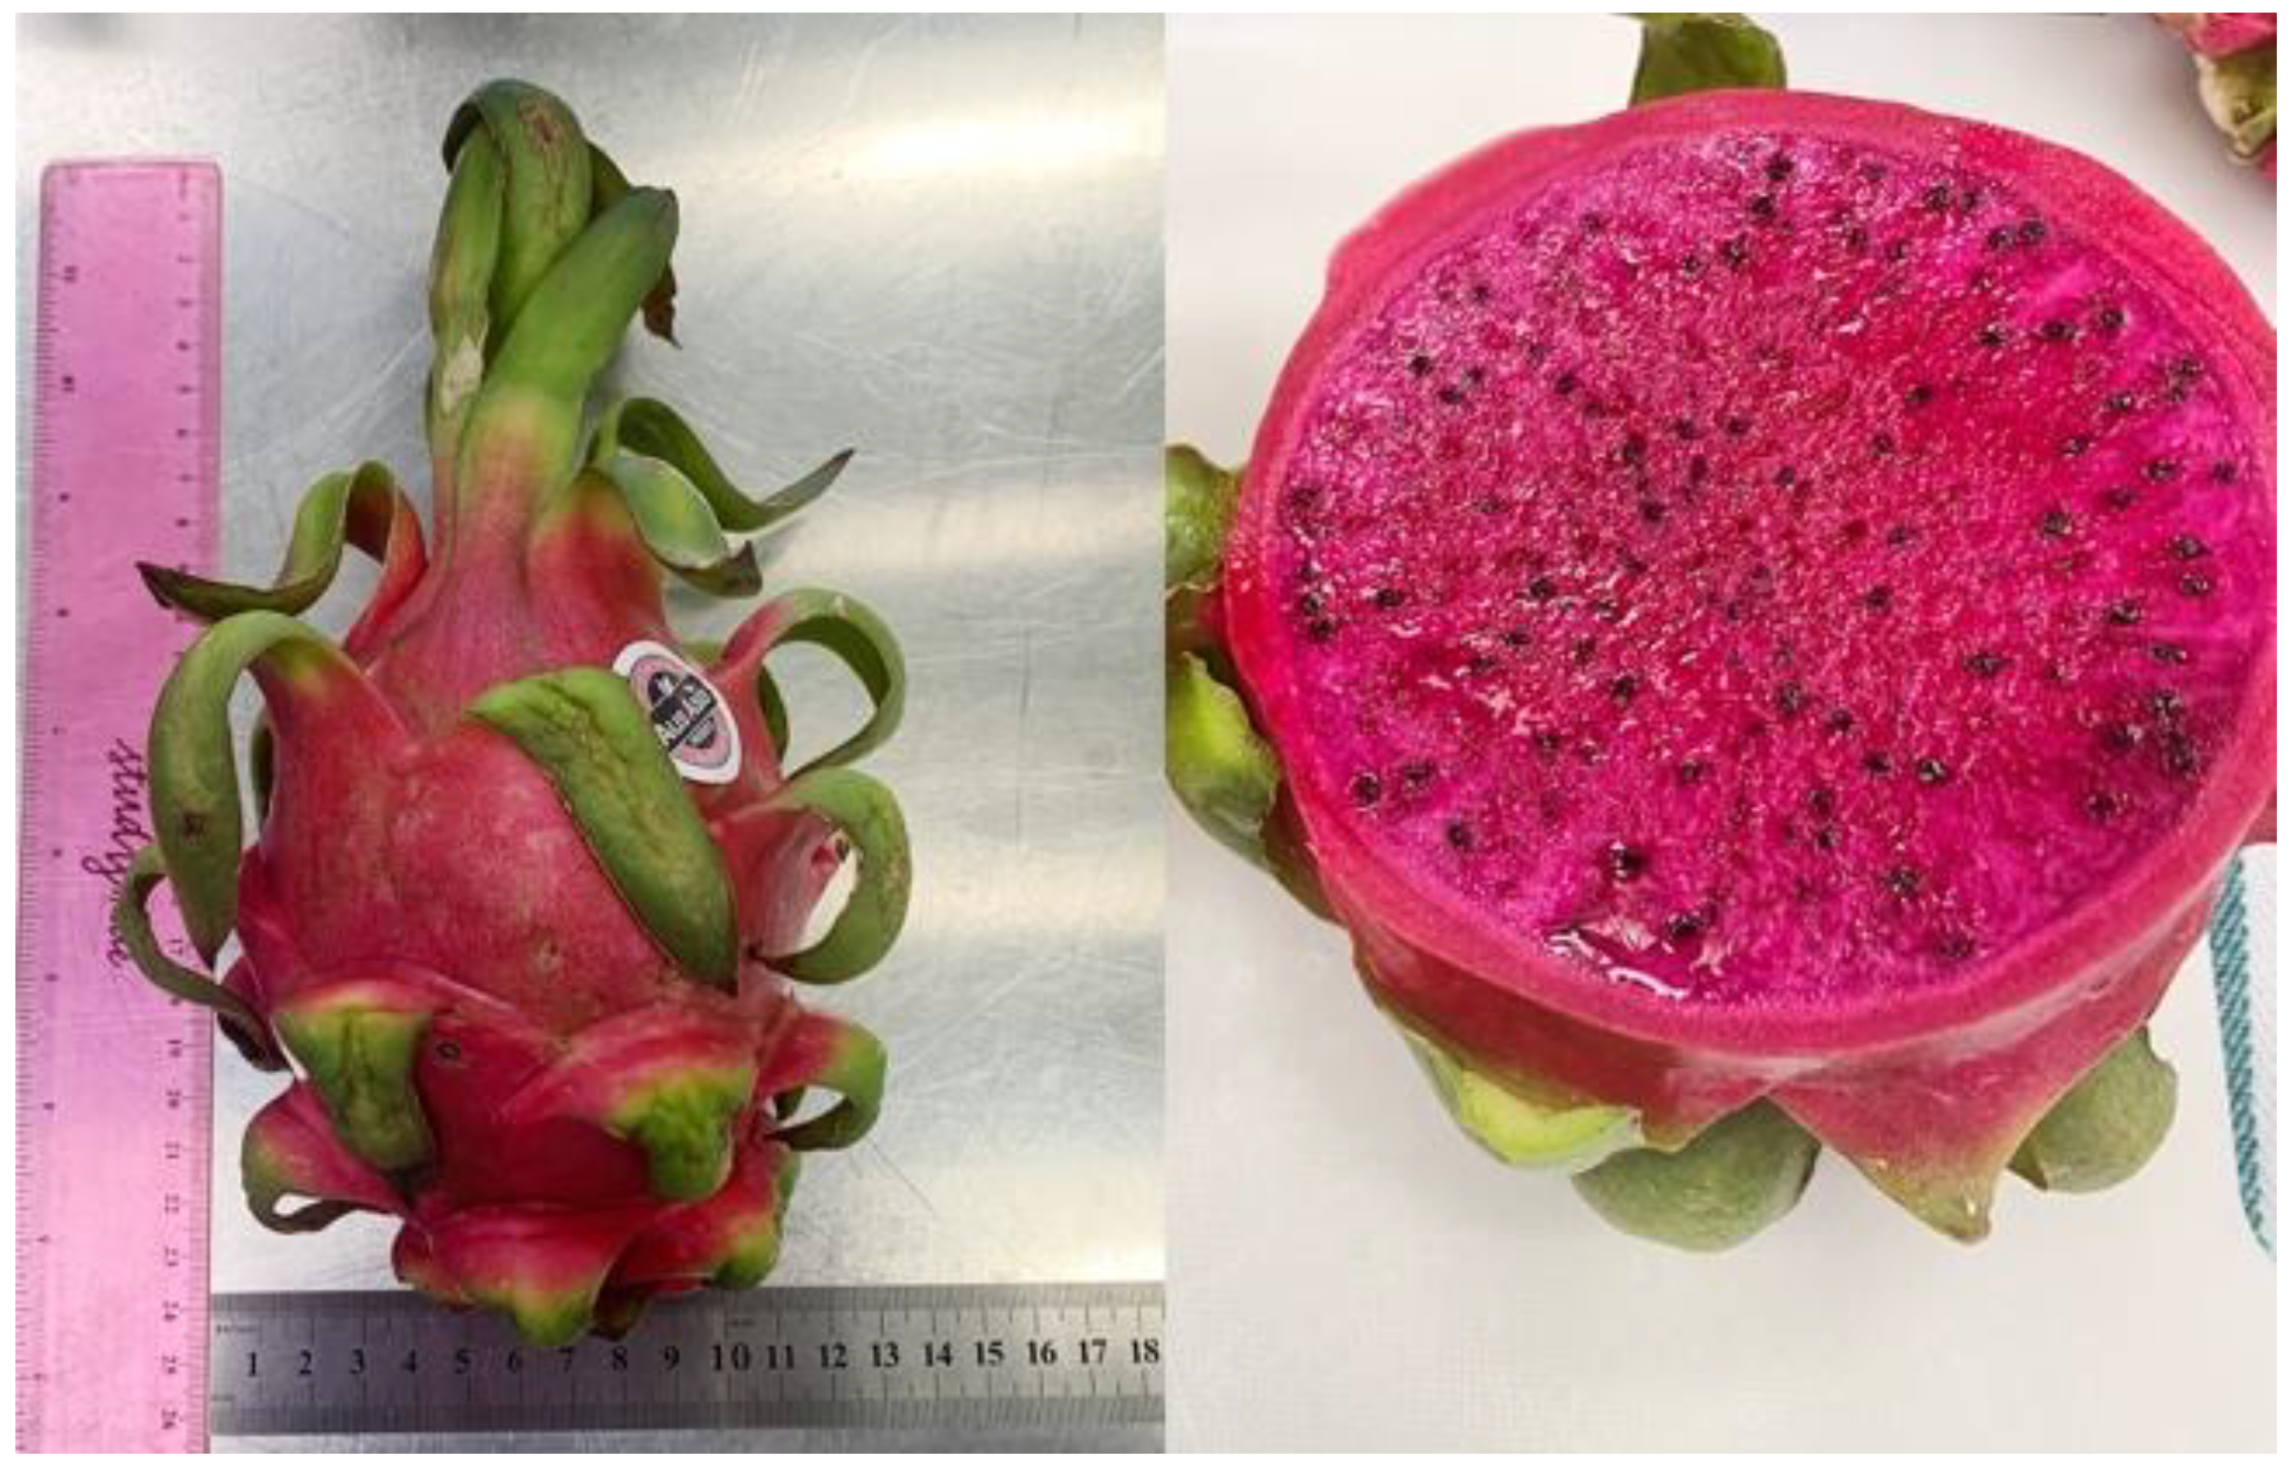 Foods | Free Full-Text | Maturation Process, Nutritional Profile,  Bioactivities and Utilisation in Food Products of Red Pitaya Fruits: A  Review | HTML